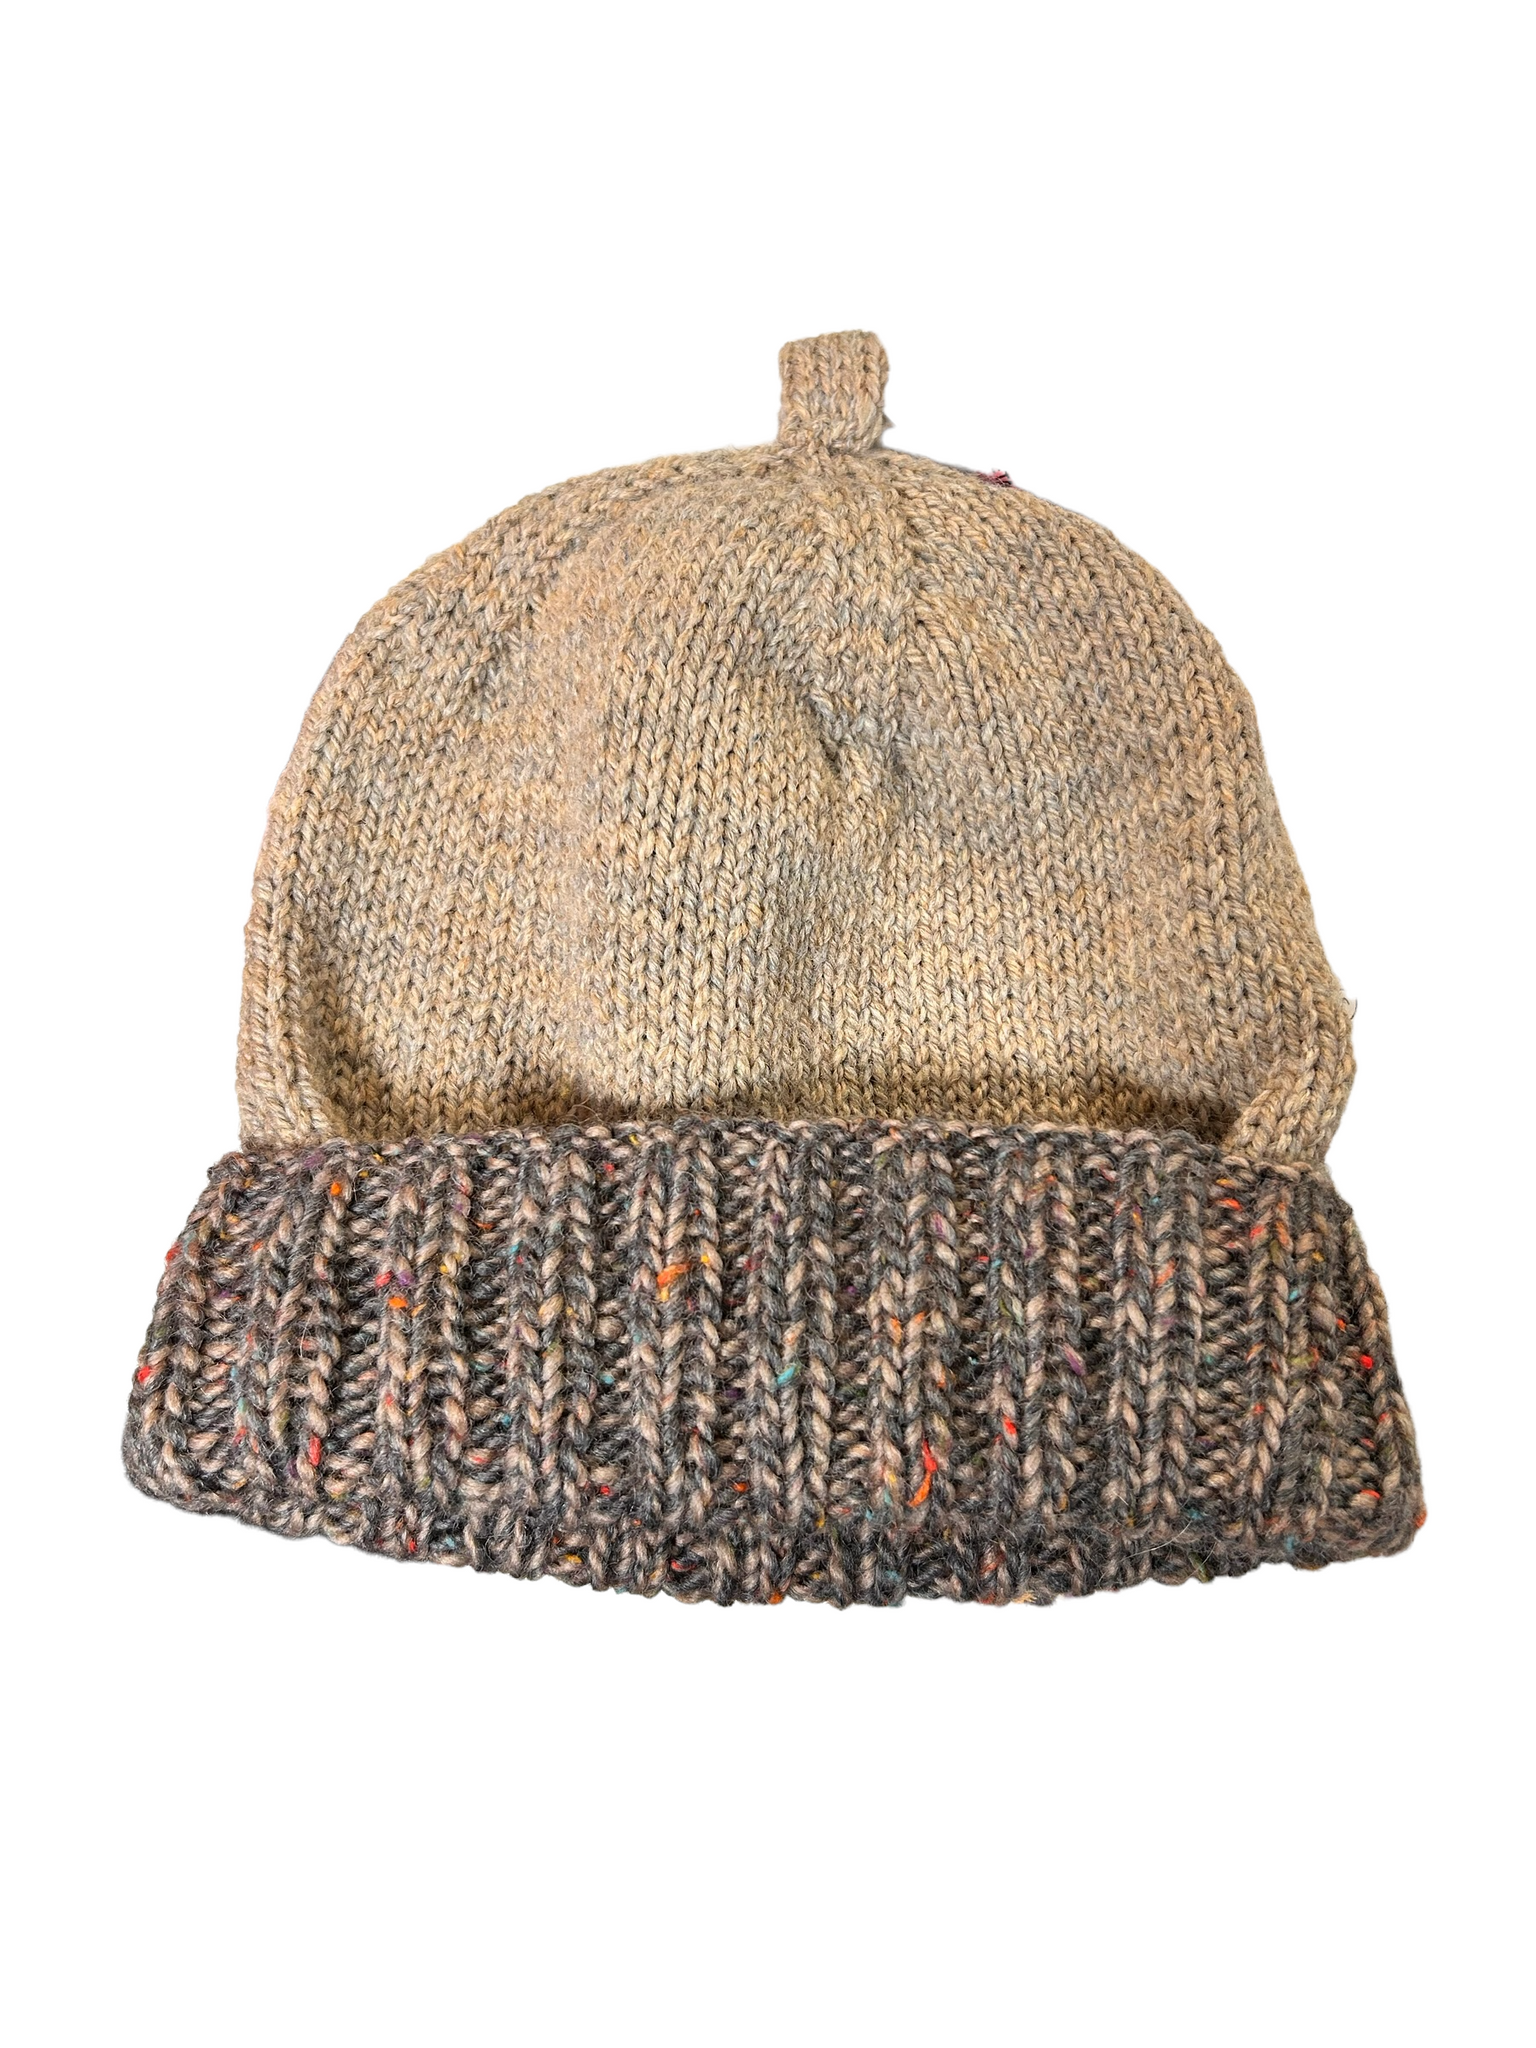 Knit Hat - Taupe Tones